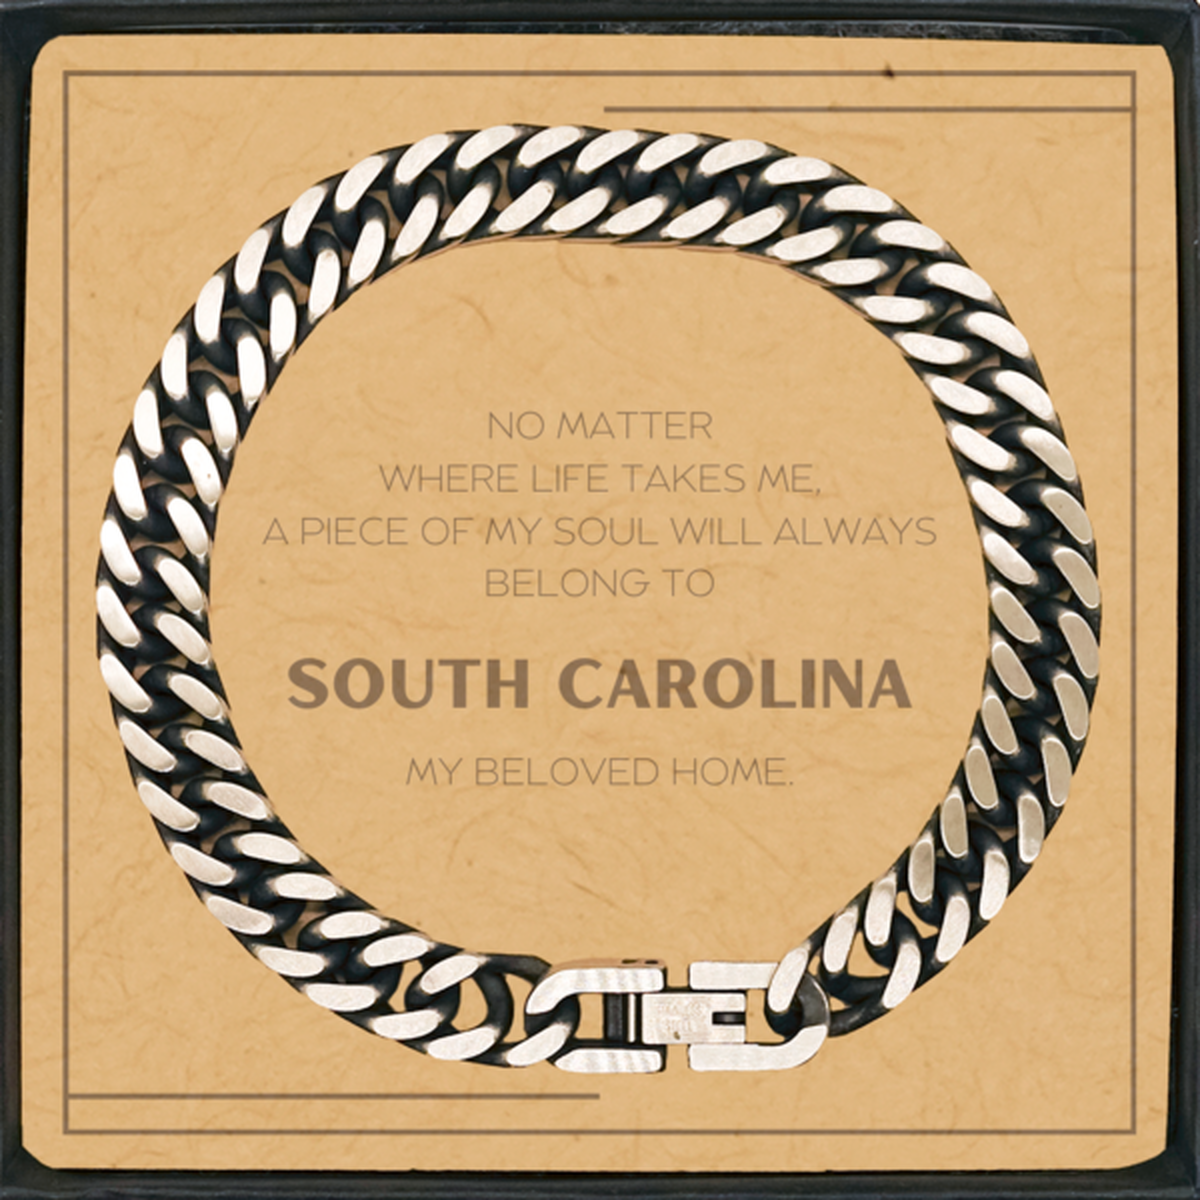 Love South Carolina State Gifts, My soul will always belong to South Carolina, Proud Cuban Link Chain Bracelet, Birthday Unique Gifts For South Carolina Men, Women, Friends